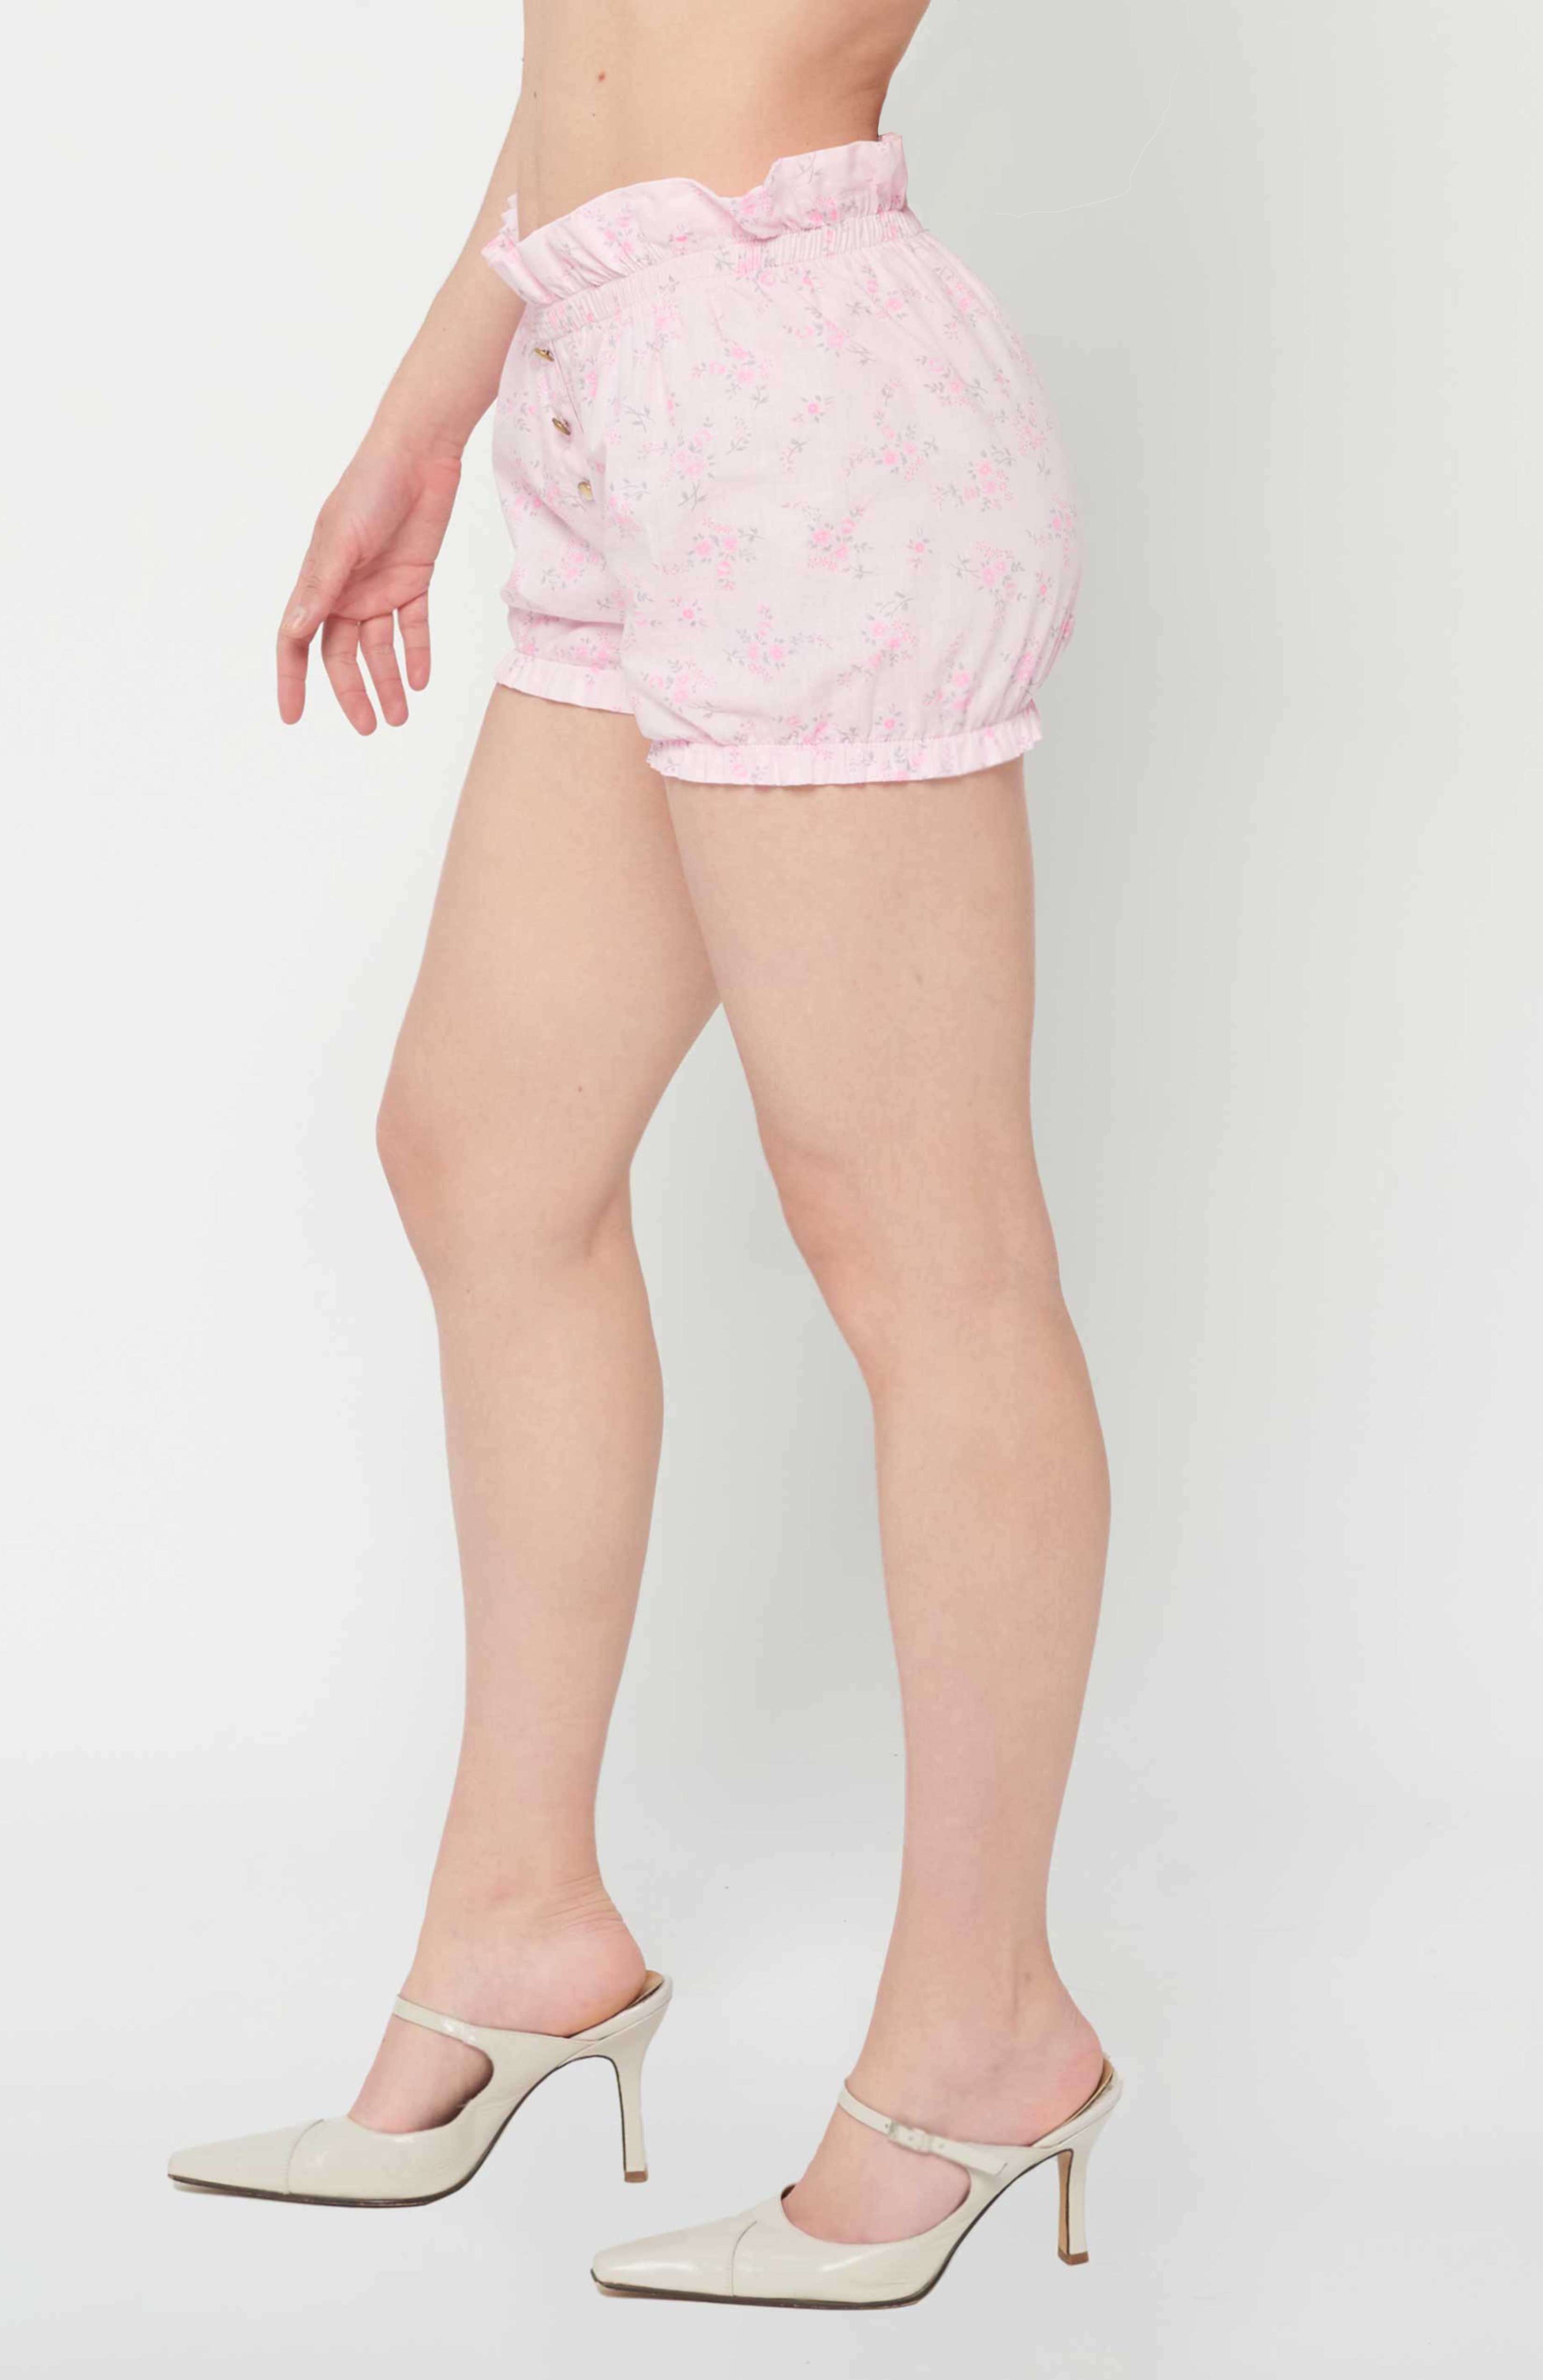 Maroske Peech high waisted cotton playful bloomer for special occasions. Featuring a soft stretchy ruffle waistband and hem. Fashioned in a light weight woven pink floral. A handy patch pocket is positioned on back. Can be easily styled under short skirts, over leggings for modesty and alternatively on its own during the warmer months.